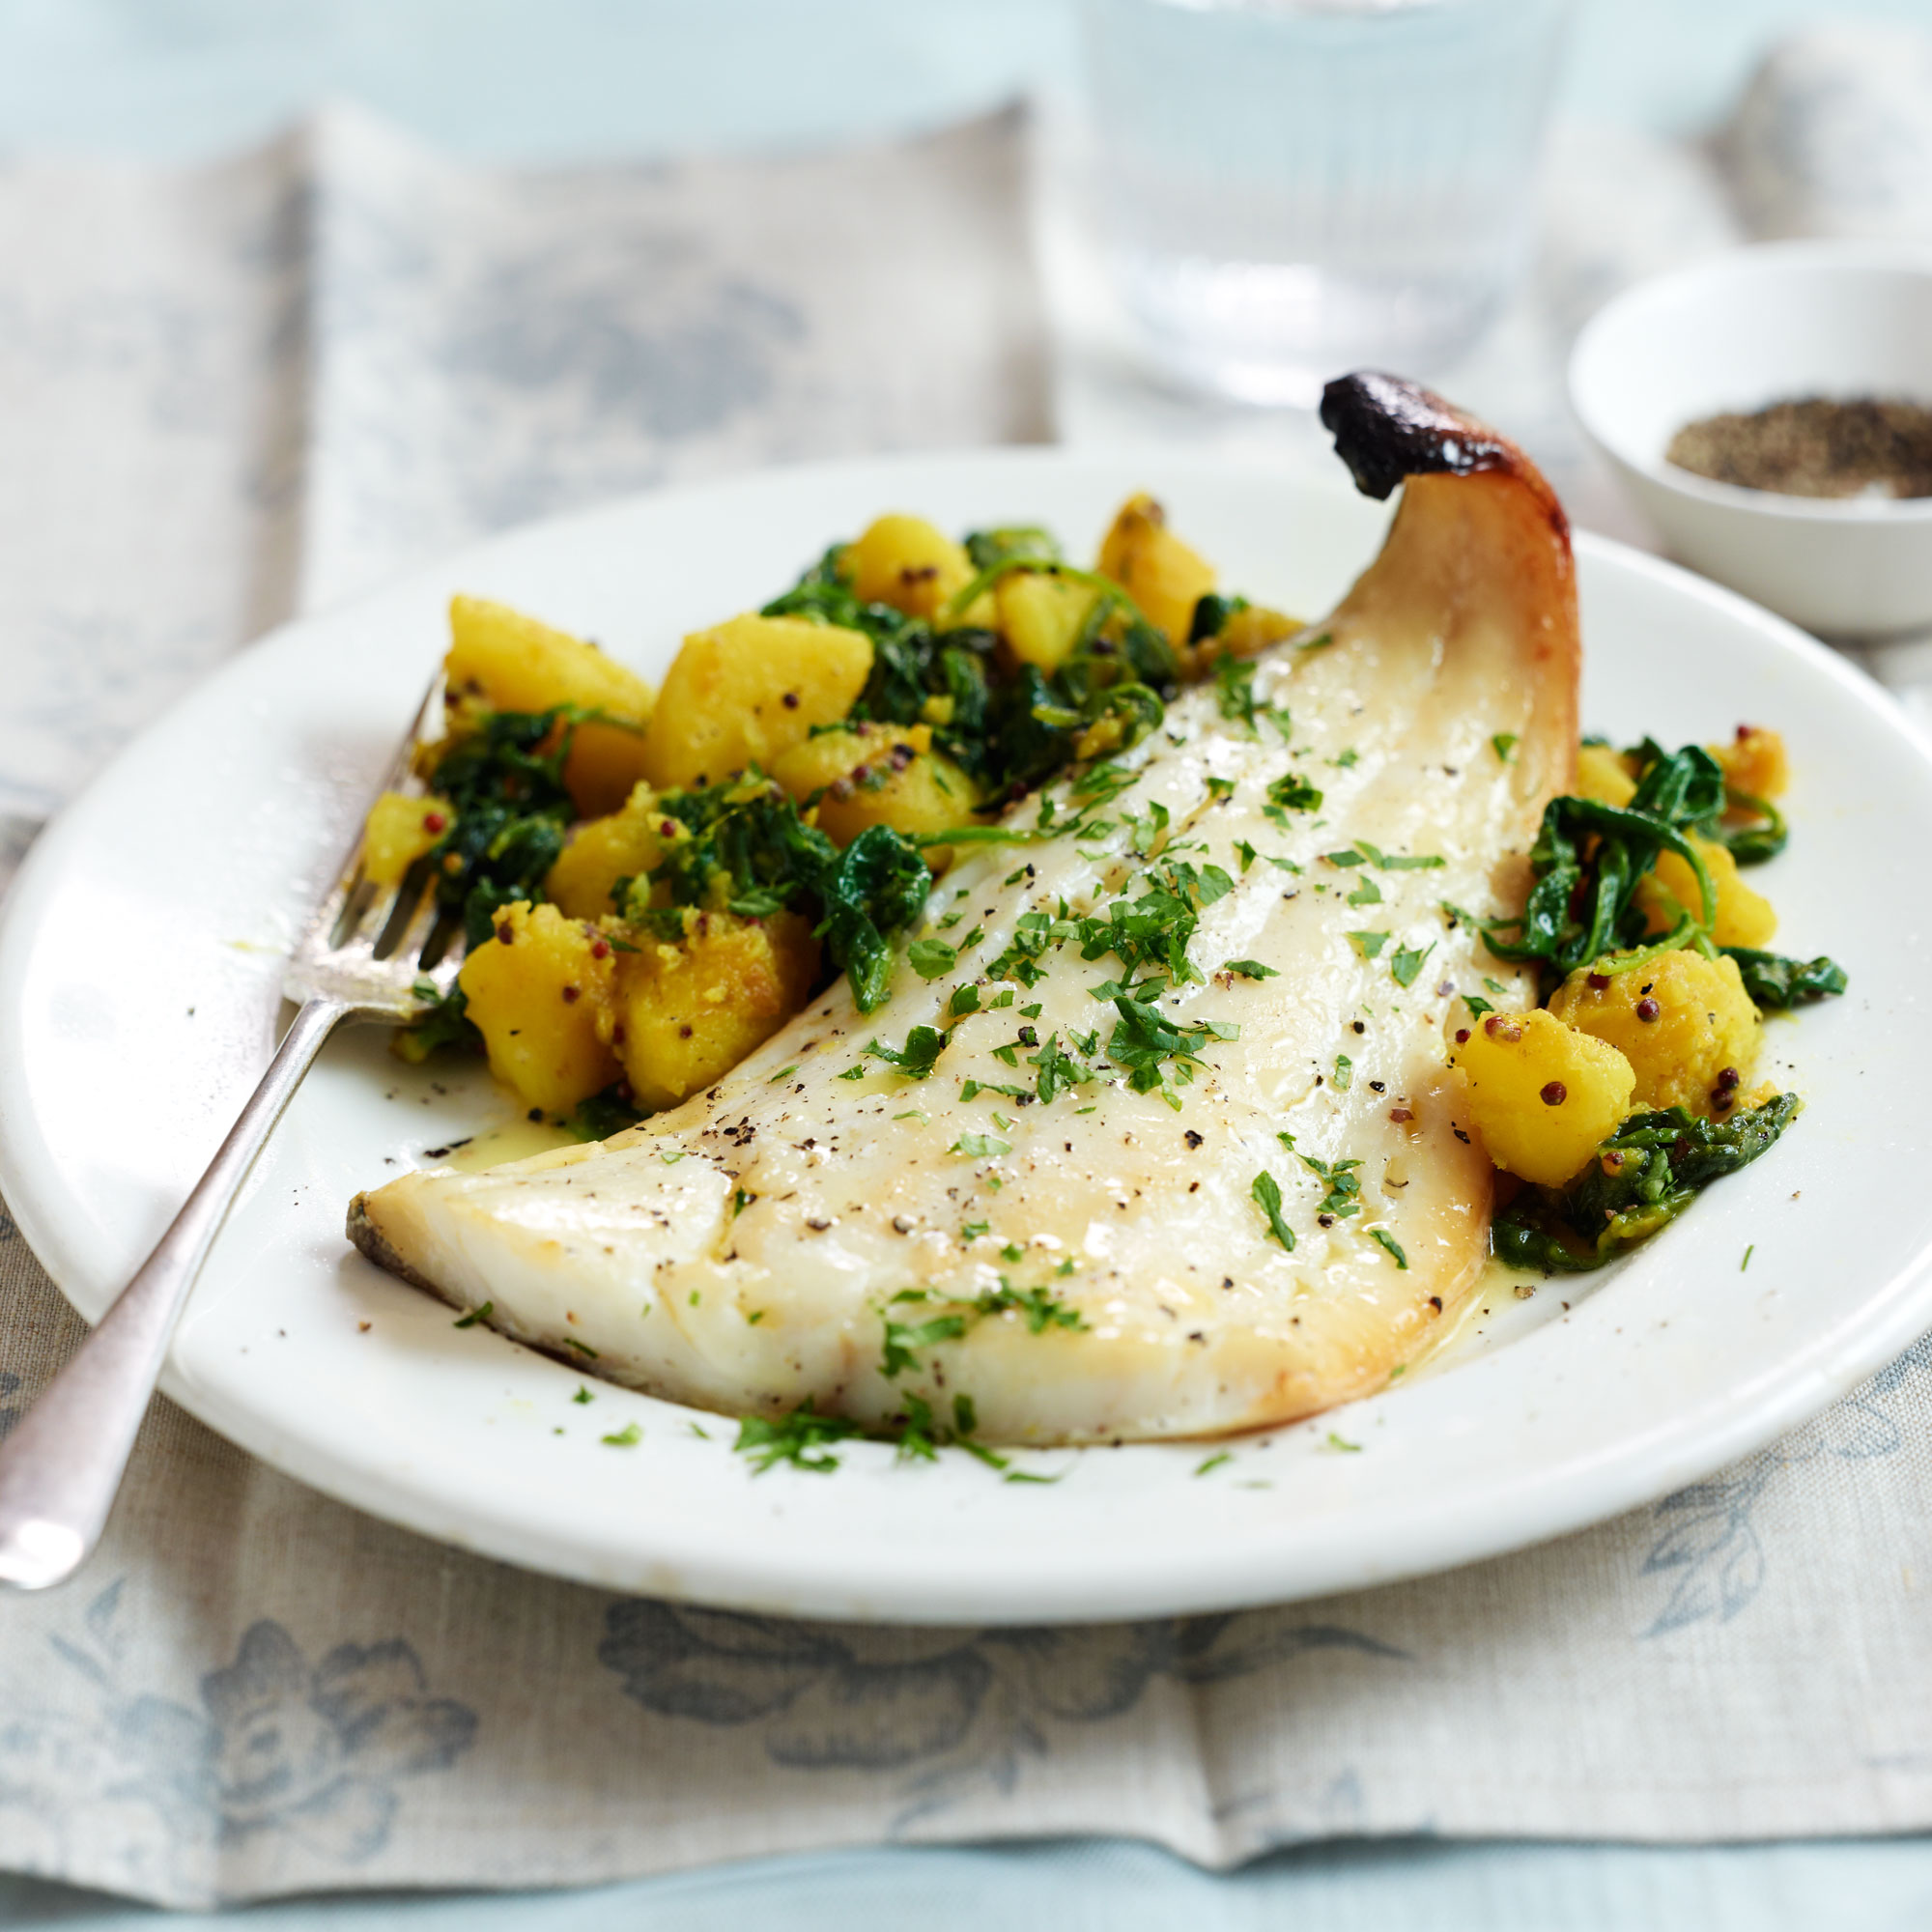 Haddock Recipes Healthy Baked Haddock With Roasted Tomato And Fennel